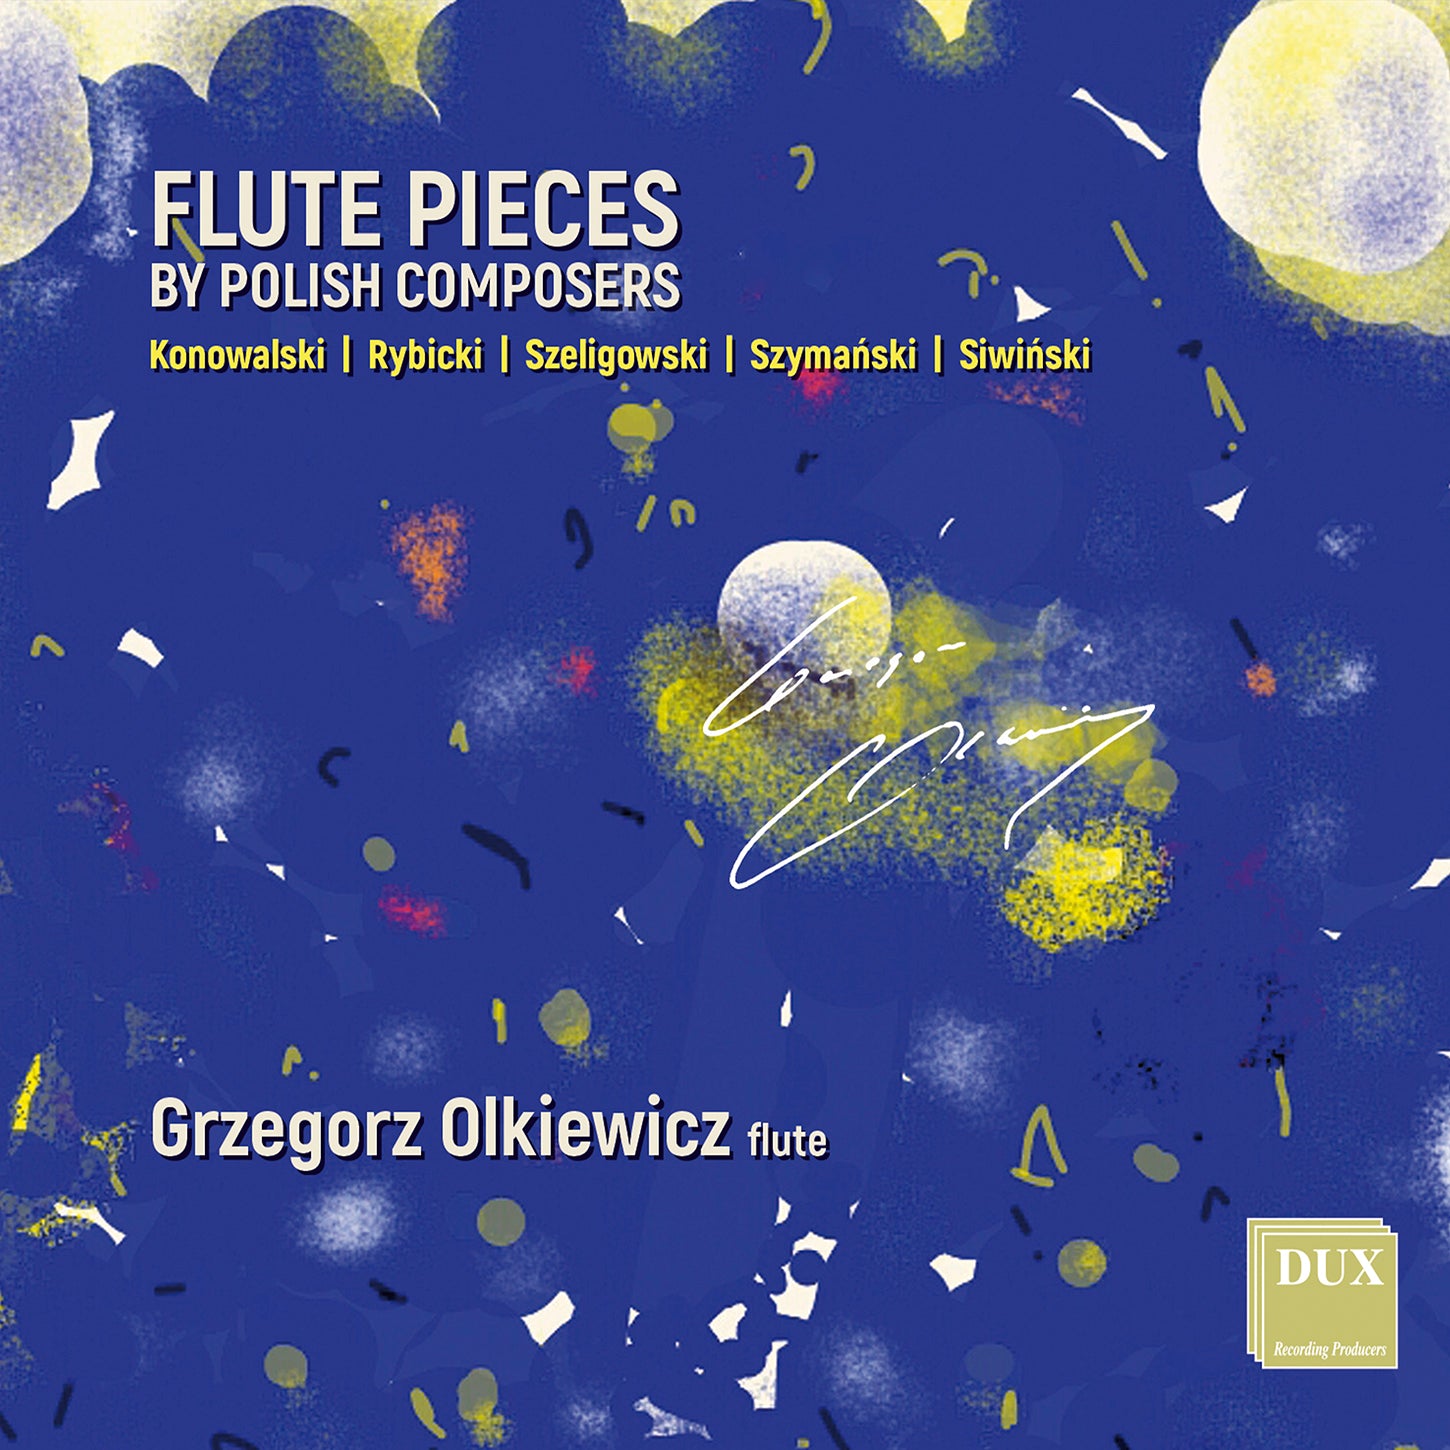 Flute Pieces by Polish Composers / Olkiewicz